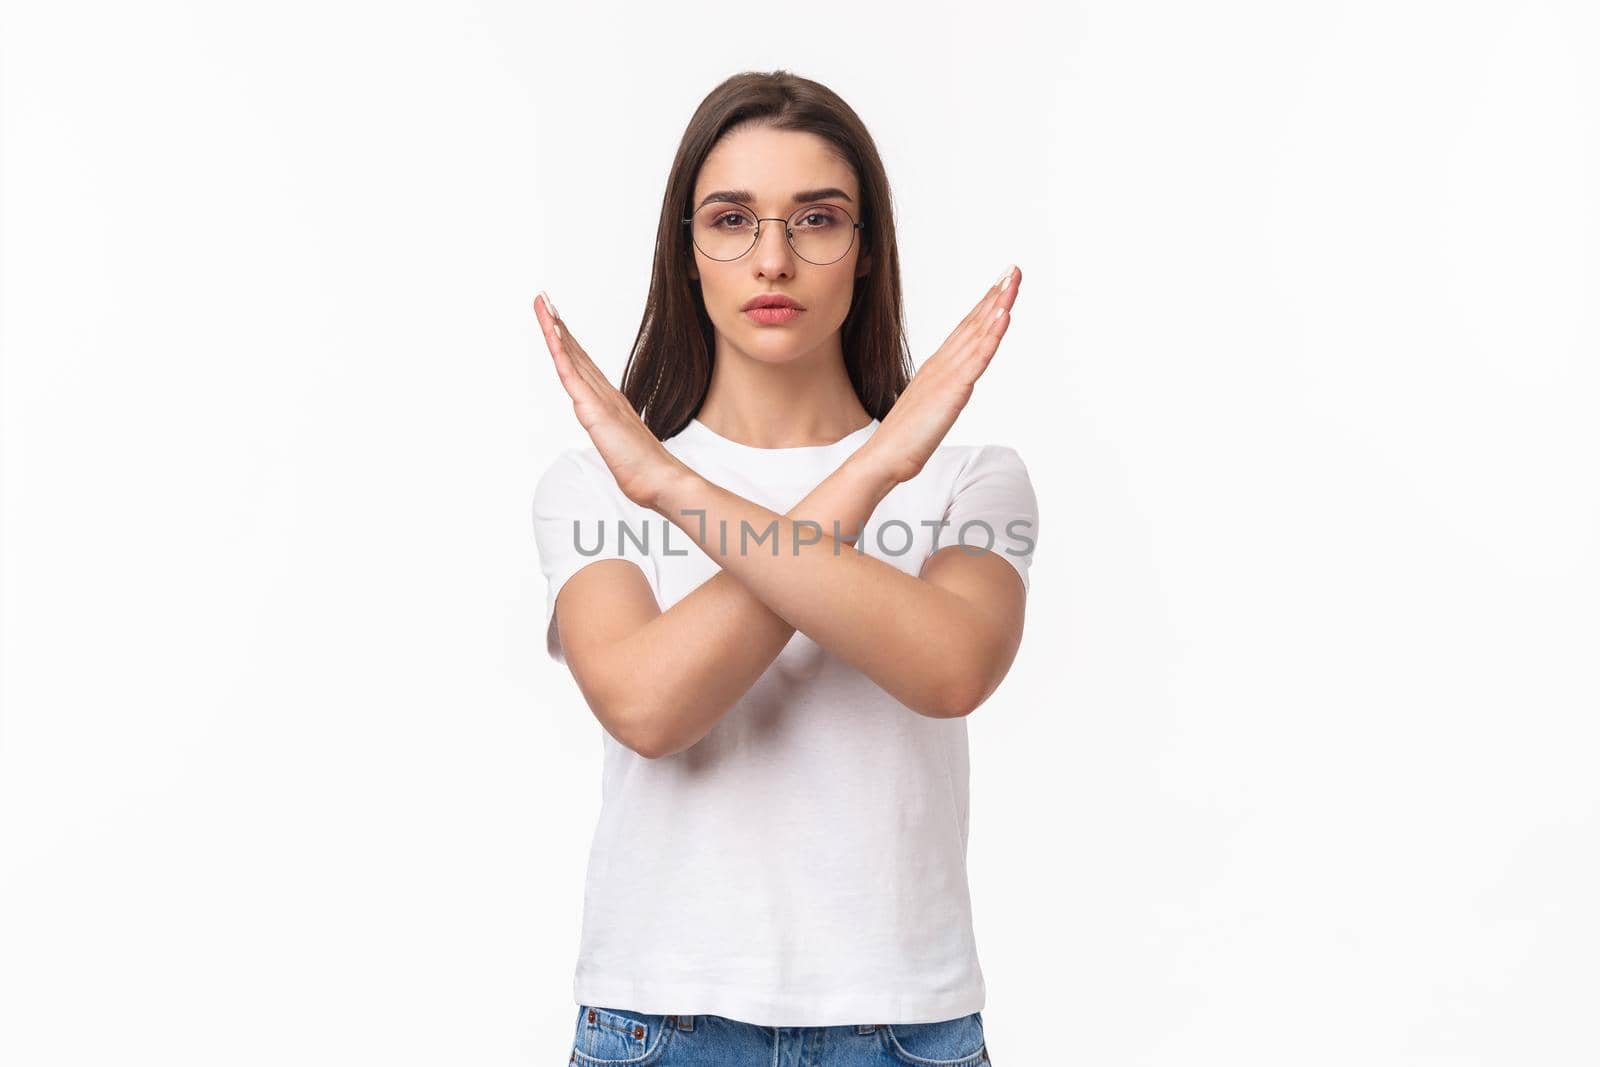 Waist-up portrait of determined, serious-looking young female activist, saying no to women opression, show cross sign in stop motion, look determined, quit something, prohibit or disapprove.